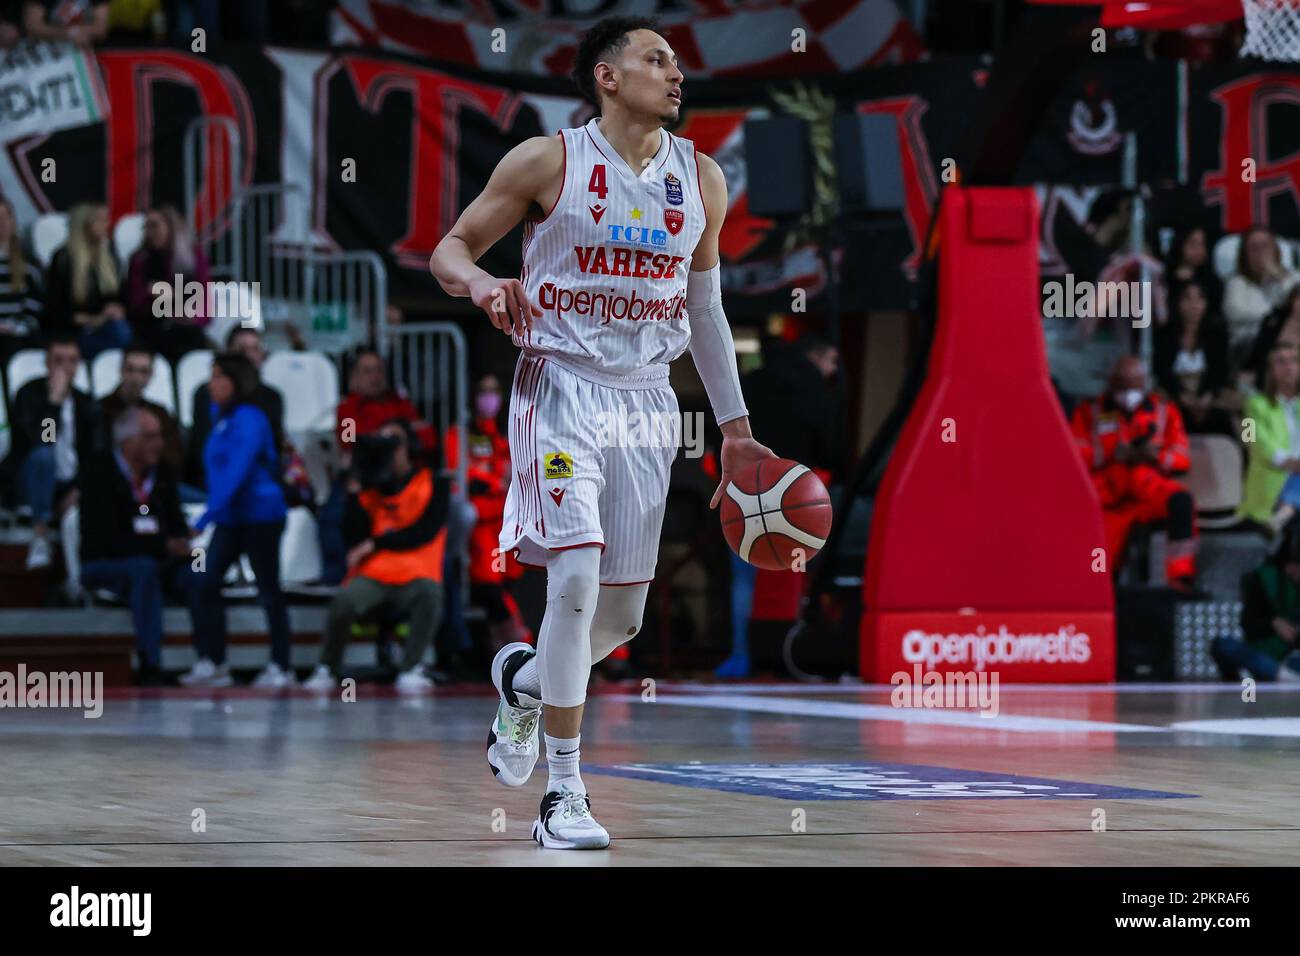 Varese, Italy. 08th Apr, 2023. Colbey Ross #4 of Pallacanestro Varese OpenJobMetis in action during LBA Lega Basket A 2022/23 Regular Season game between Pallacanestro Varese OpenJobMetis and Unahotels Reggio Emilia at Palasport Lino Oldrini. Final score; Varese 81:85 Reggiana. (Photo by Fabrizio Carabelli/SOPA Images/Sipa USA) Credit: Sipa USA/Alamy Live News Stock Photo